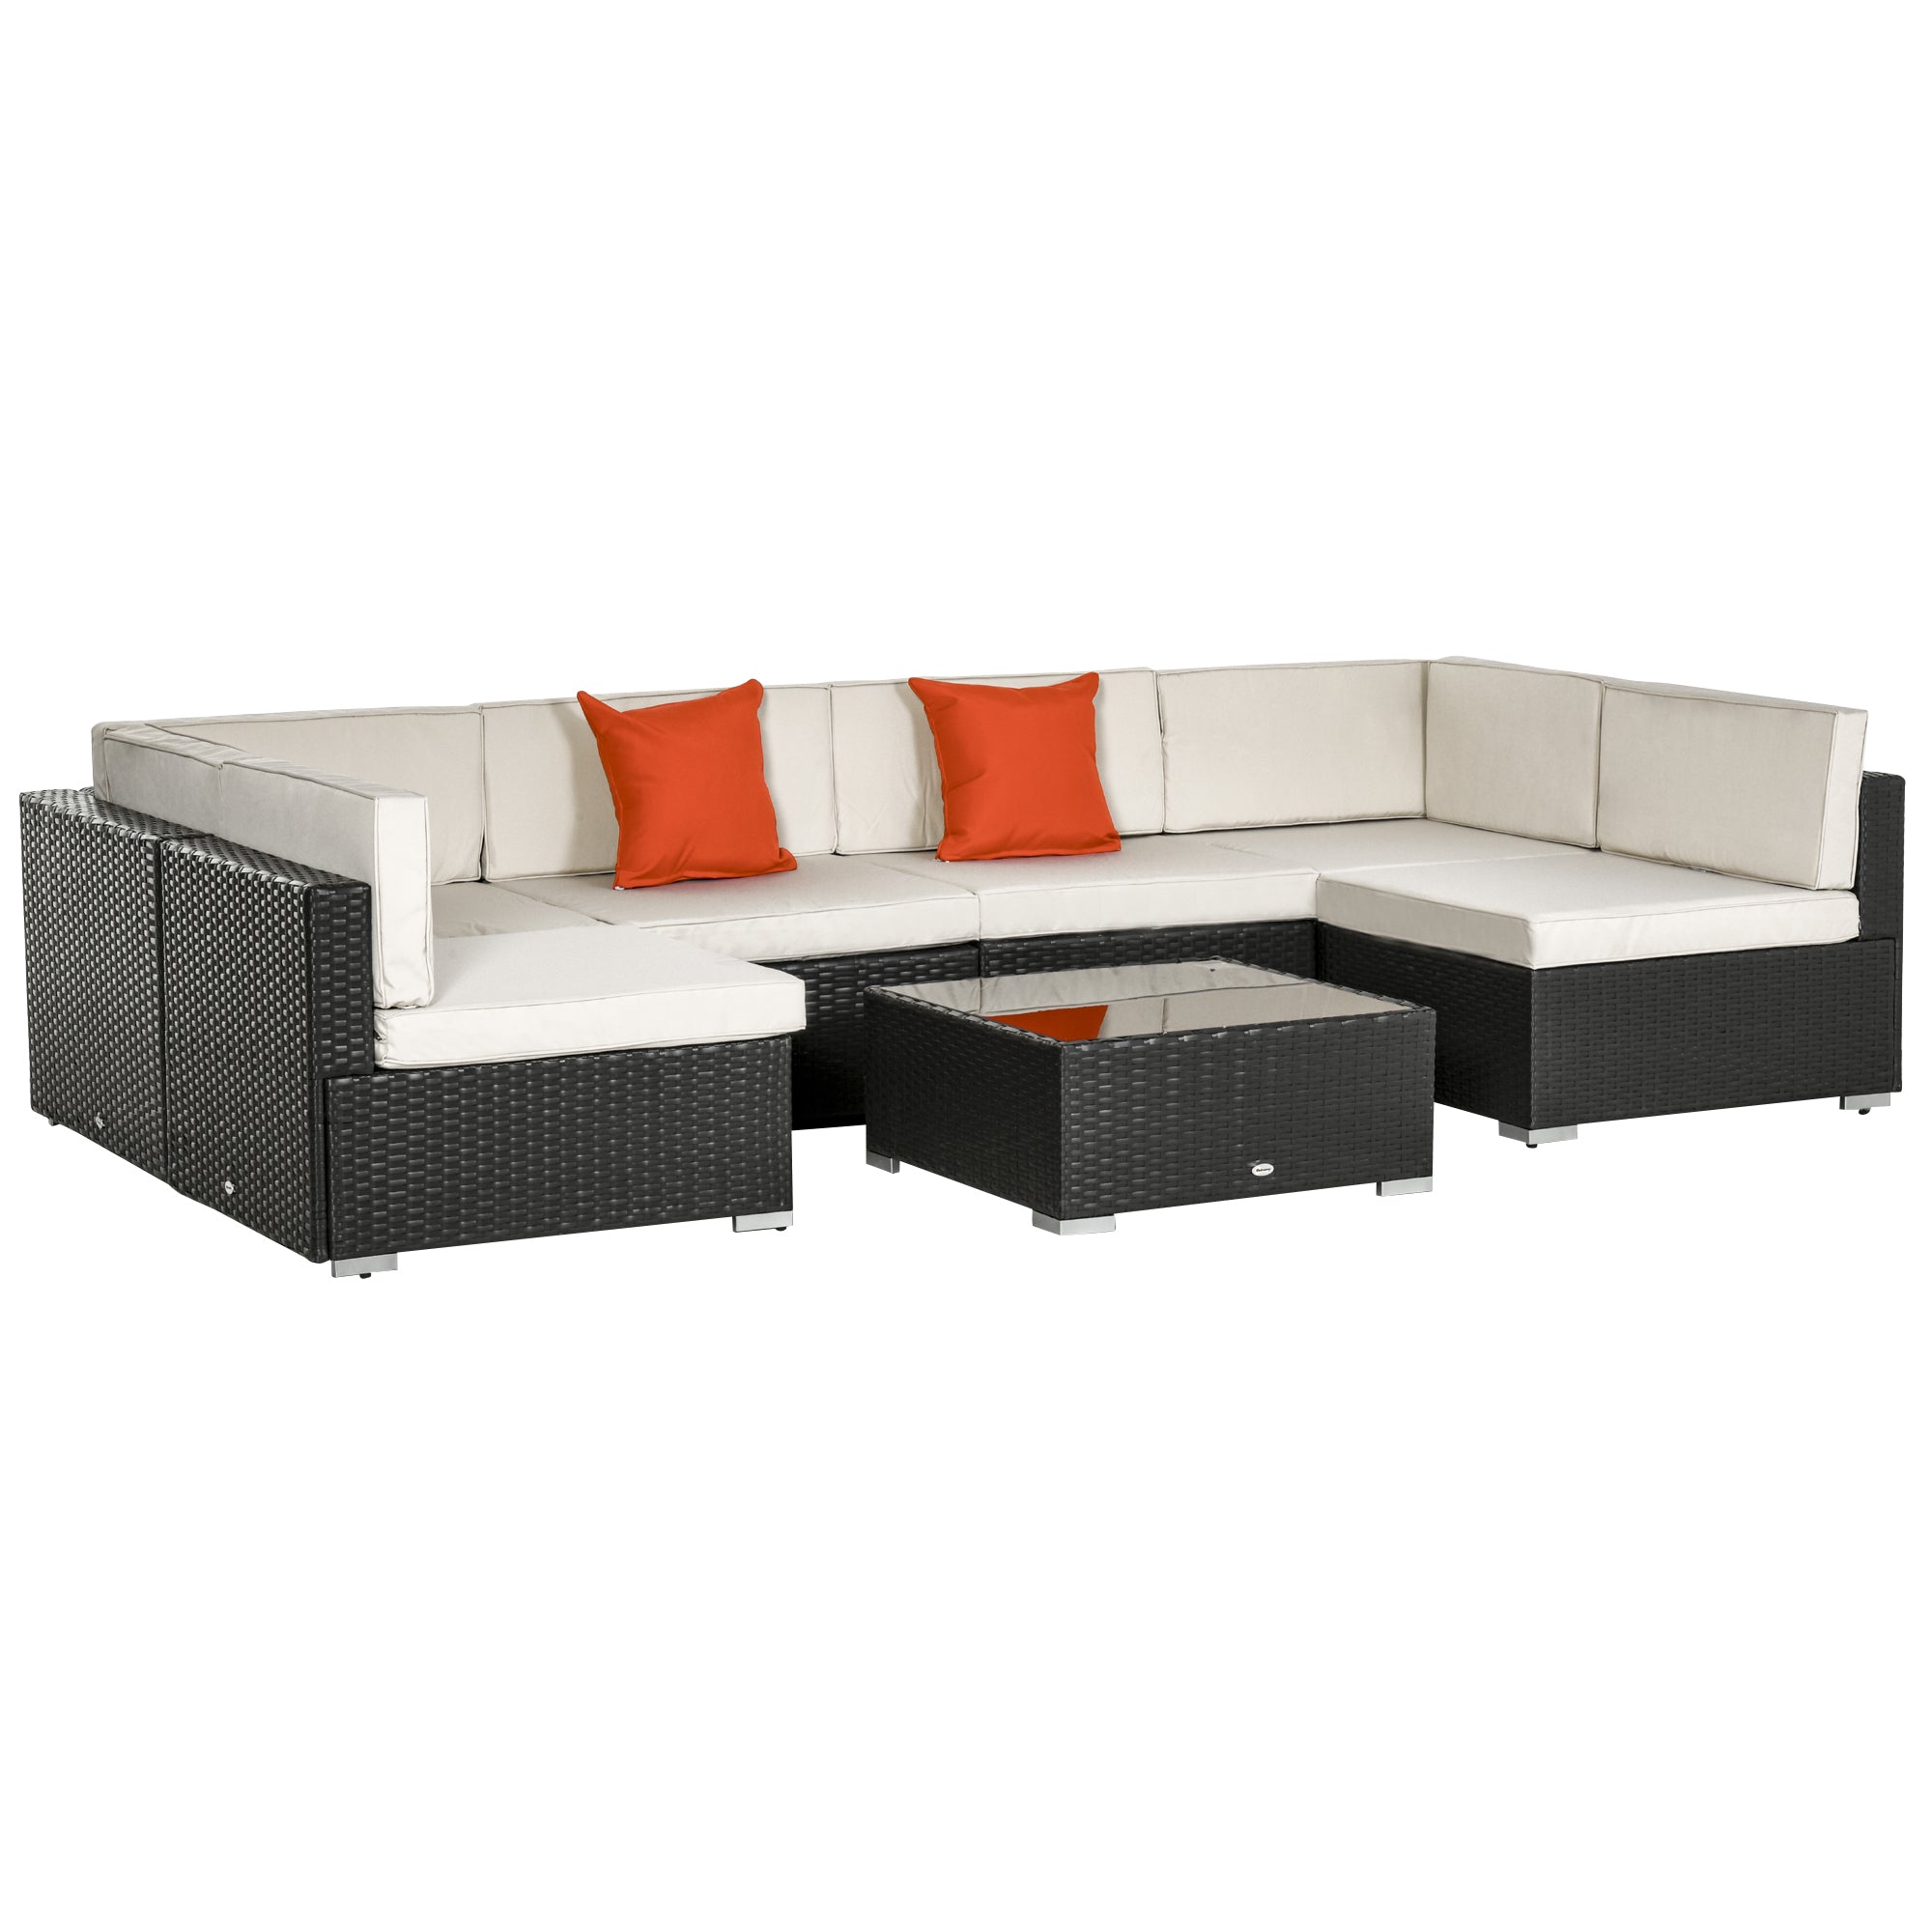 Outsunny Outdoor Rattan Furniture Sectional Sofa Set 7 Piece - Brown & Cream  | TJ Hughes